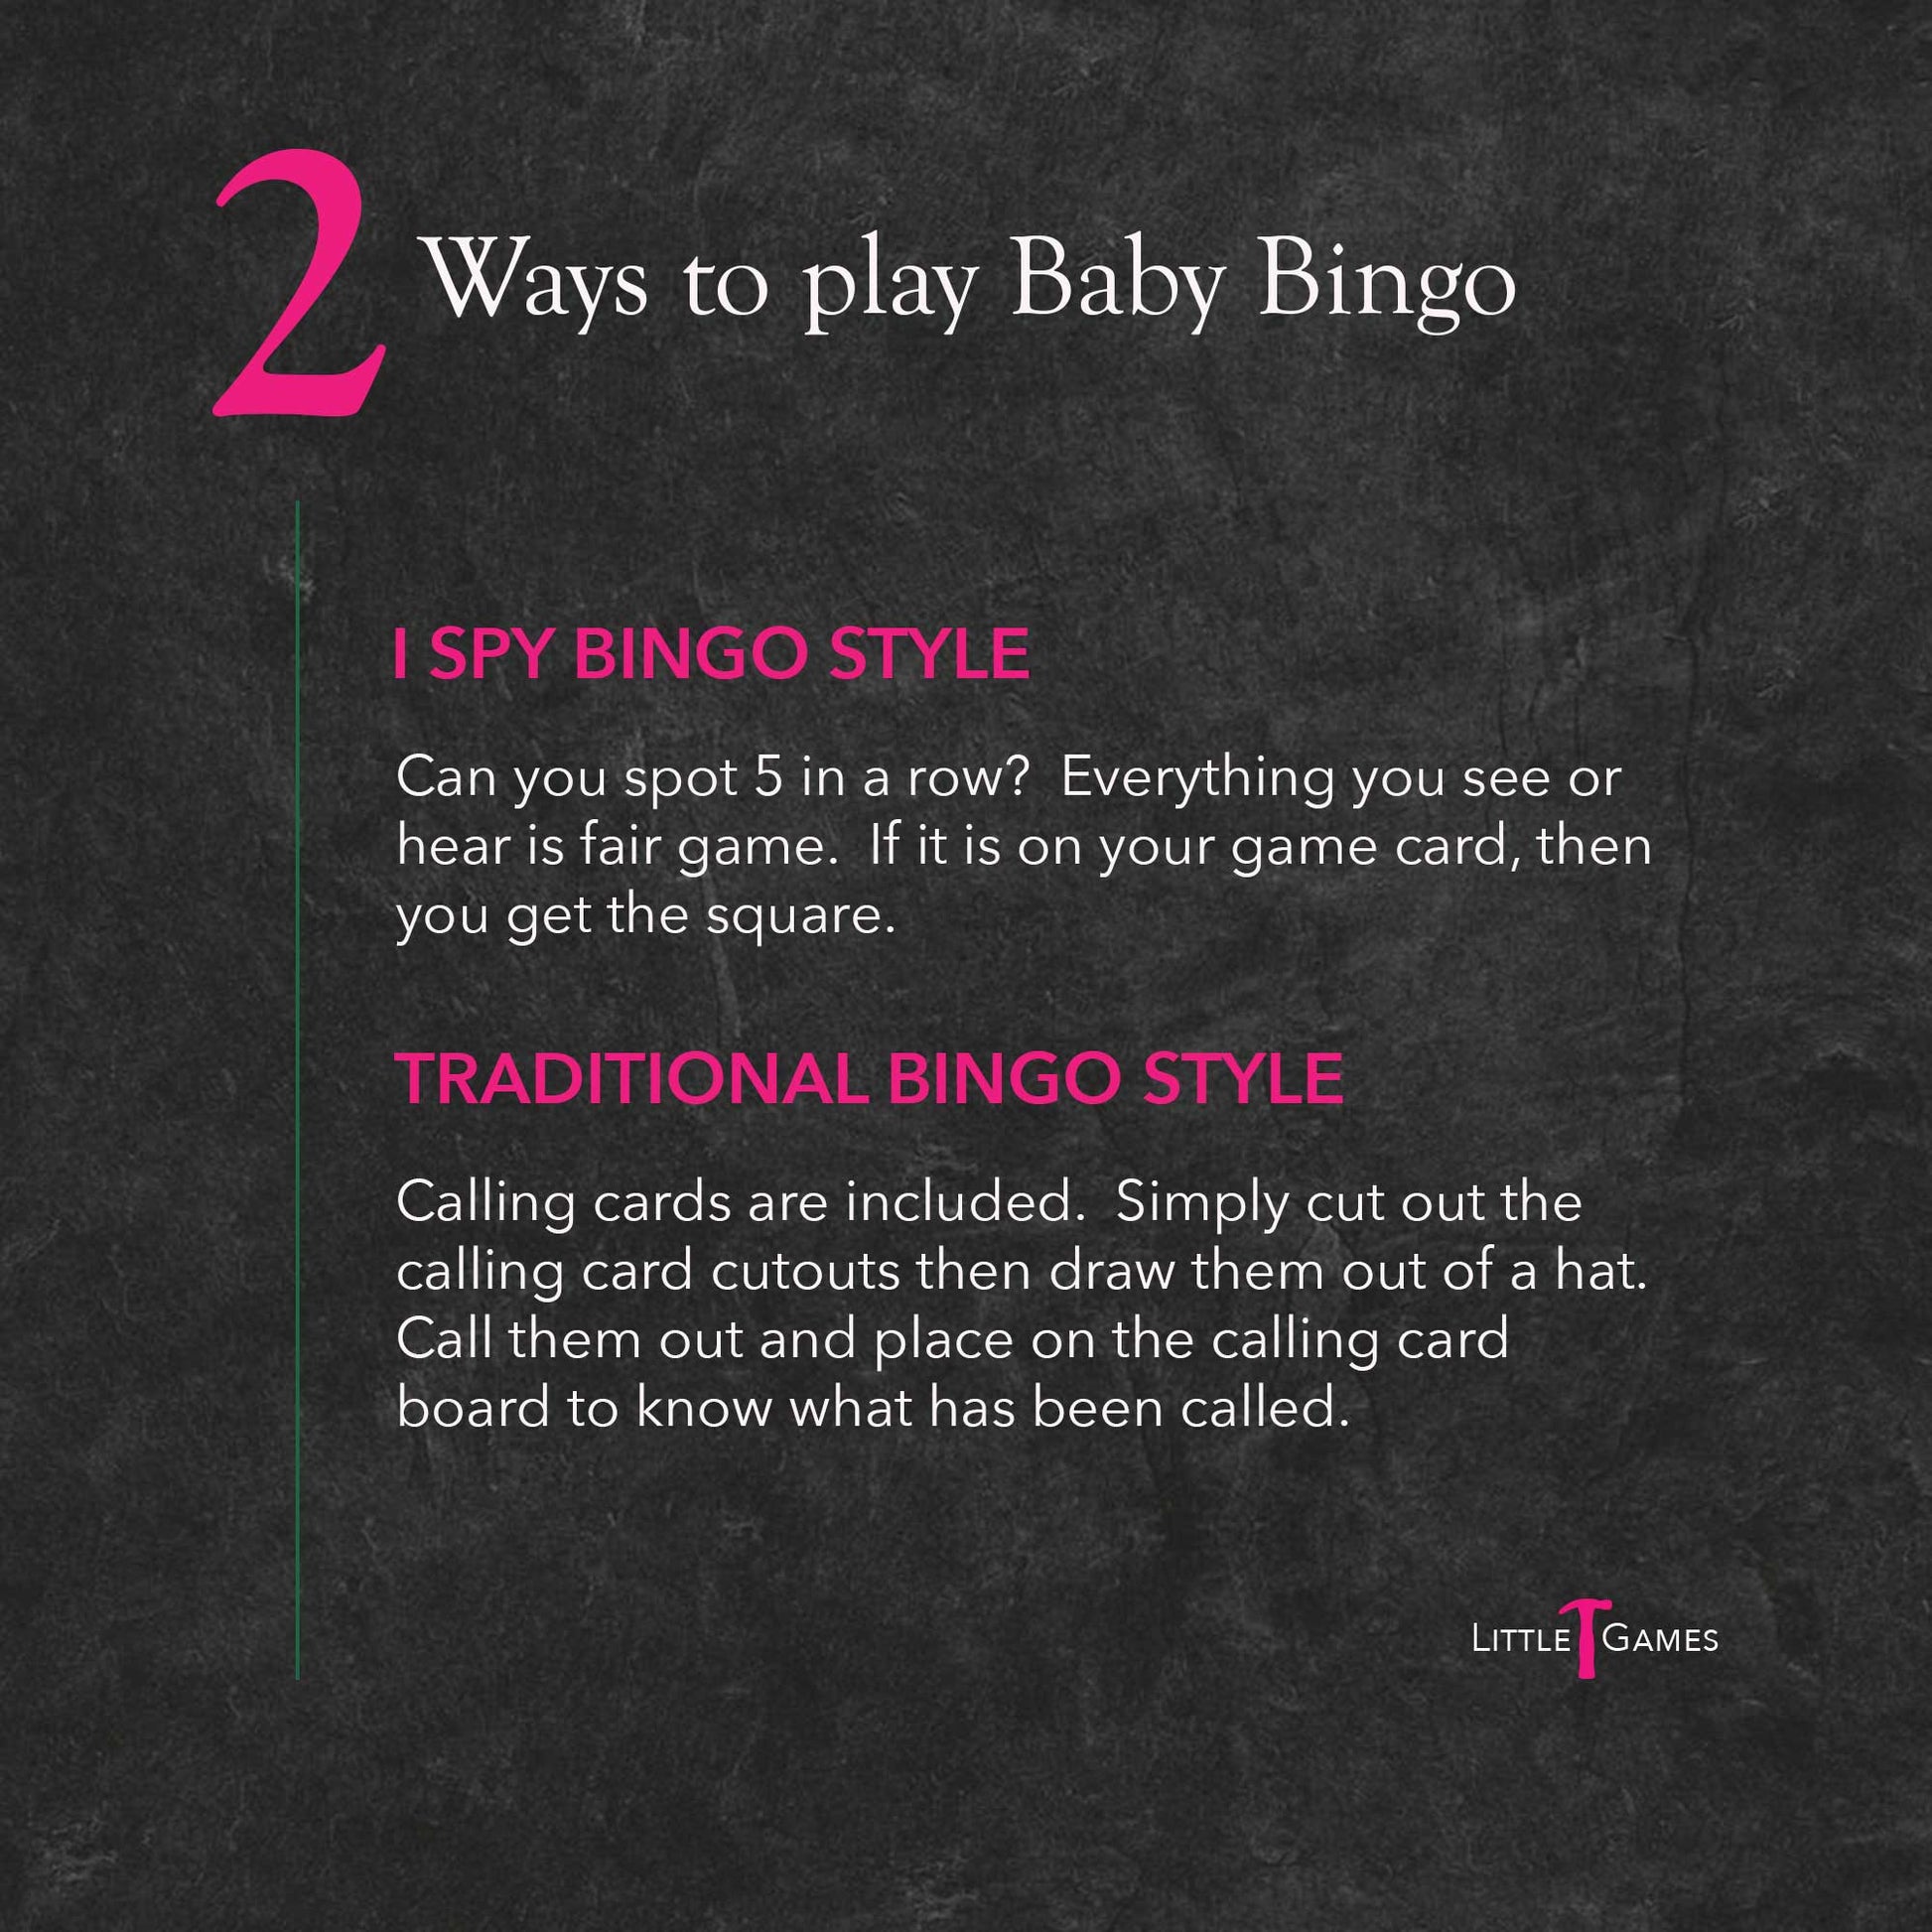 Pink and white text on a slate background explaining the 2 ways to play Baby Bingo as either I Spy or Traditional style